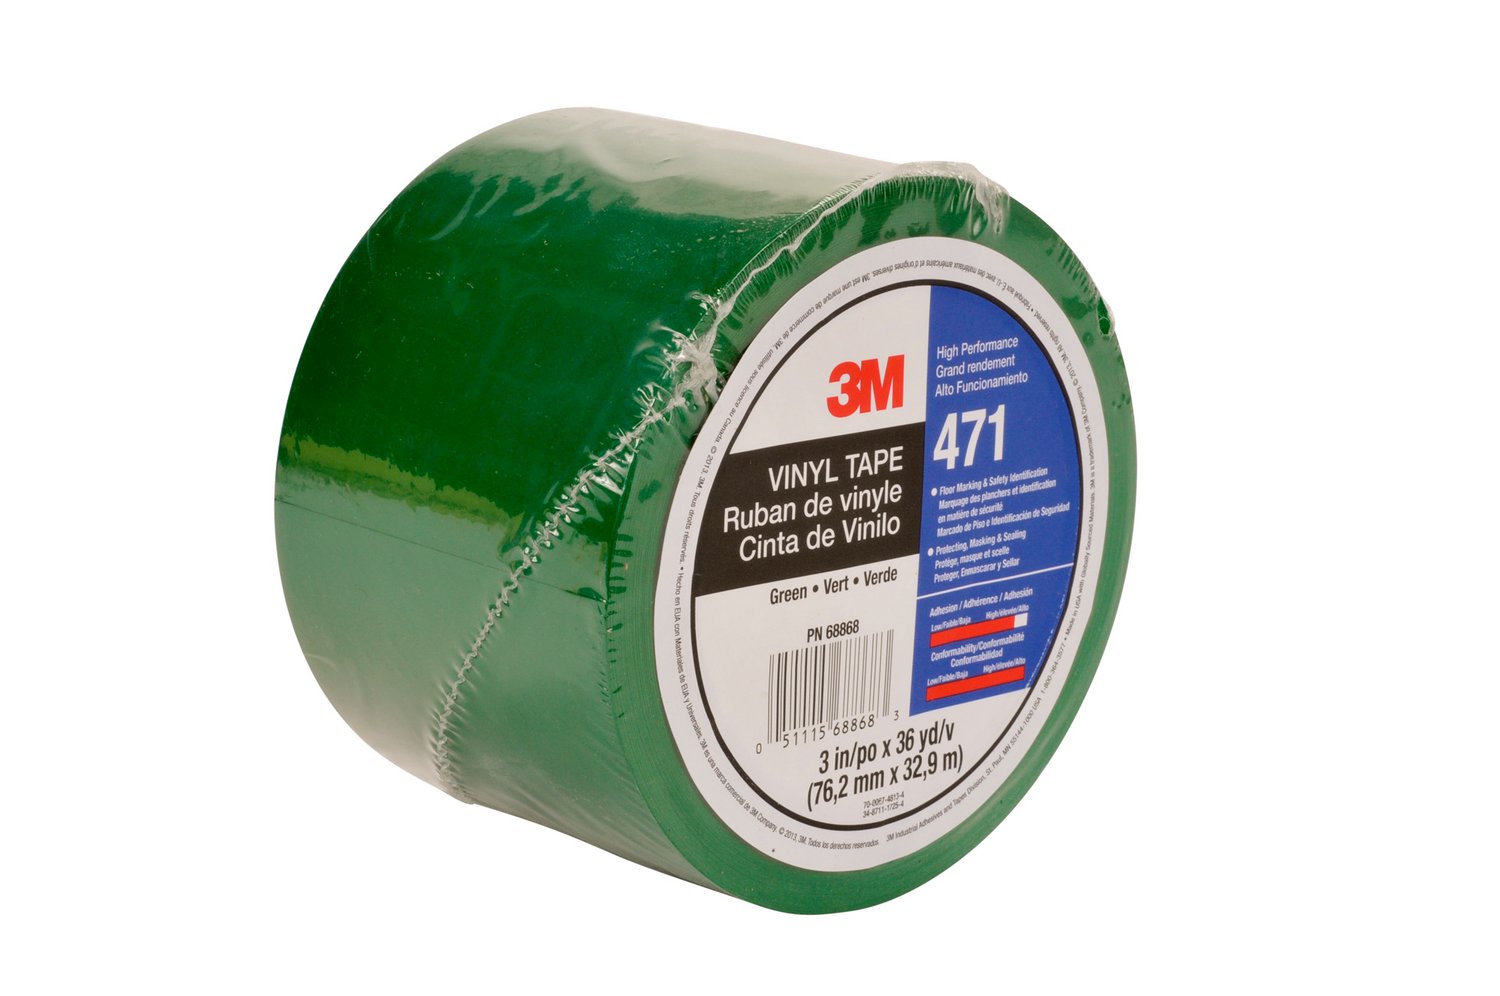 7010375094 - 3M Vinyl Tape 471, Green, 3 in x 36 yd, 5.2 mil, 12 Roll/Case, Individually Wrapped Conveniently Packaged